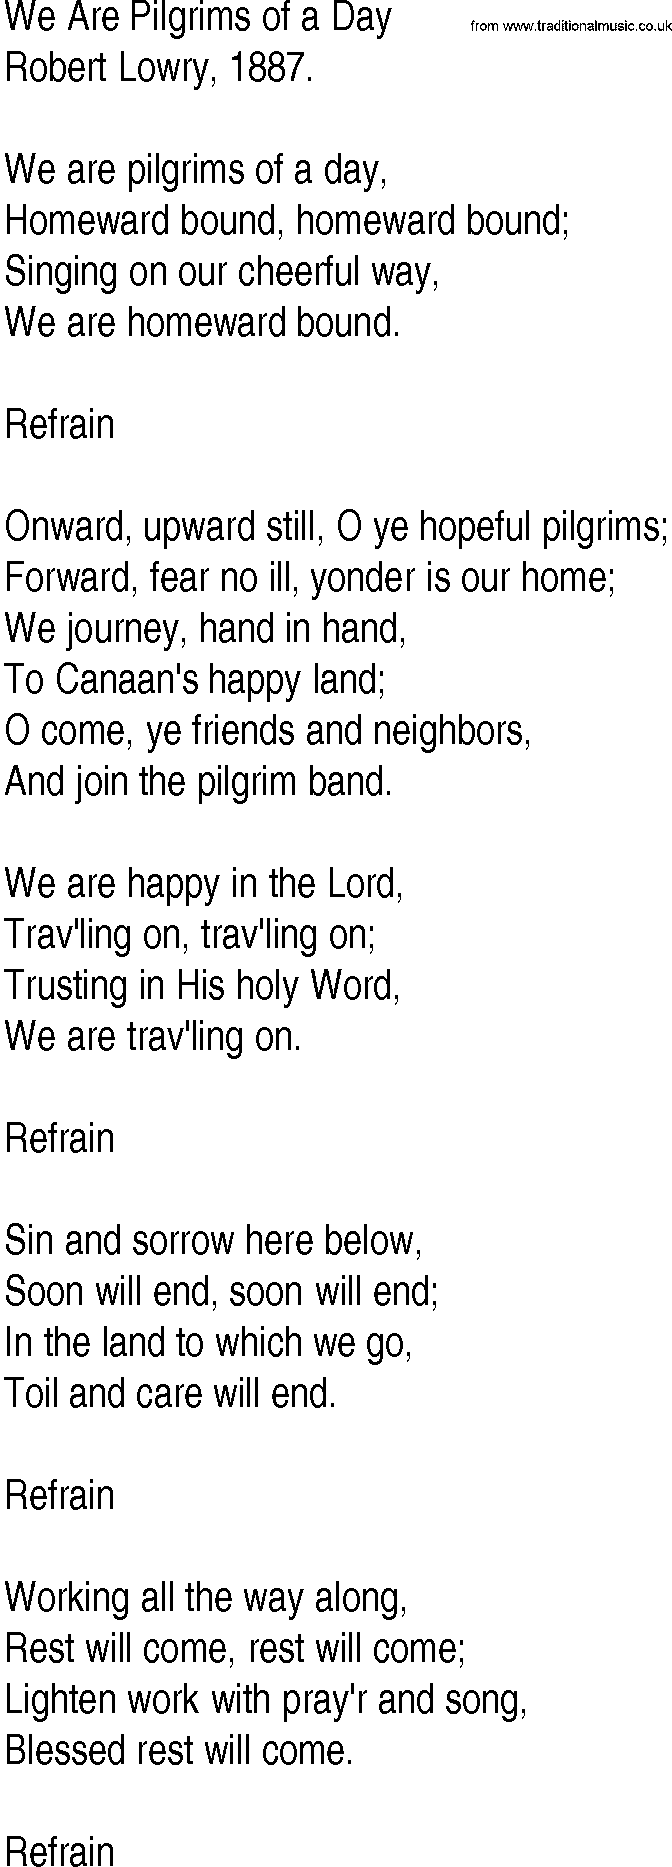 Hymn and Gospel Song: We Are Pilgrims of a Day by Robert Lowry lyrics